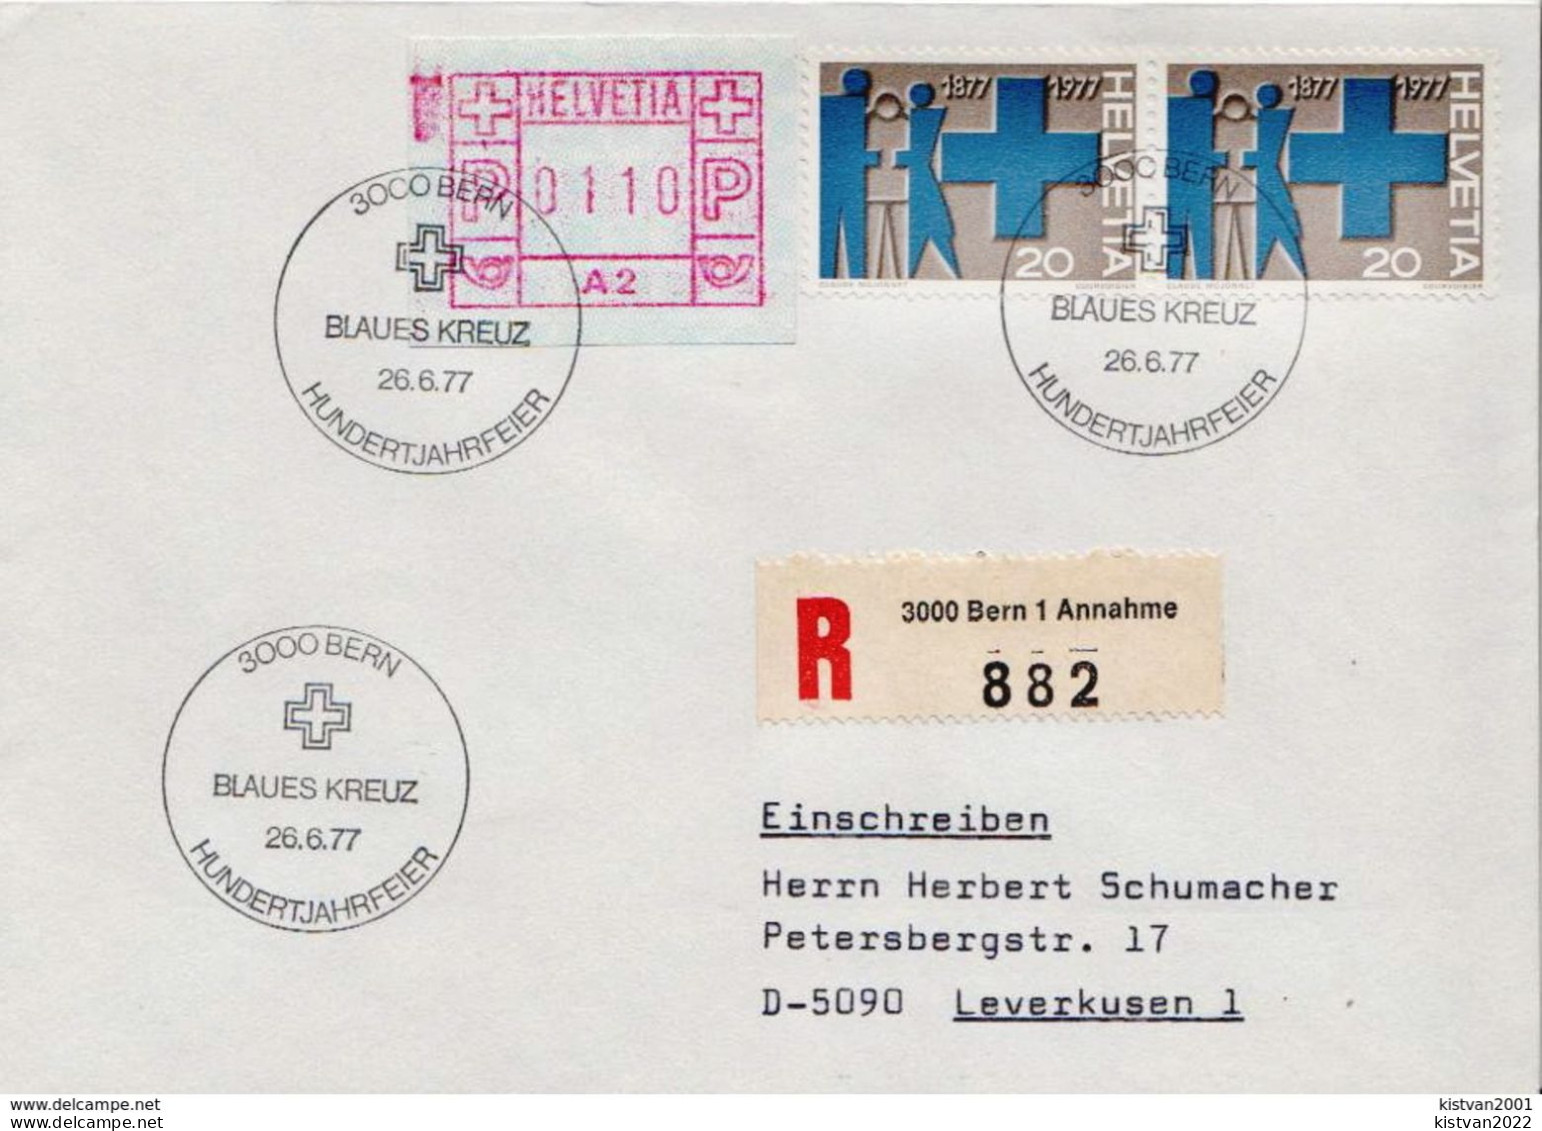 Postal History: Switzerland Registered Cover With Automat Stamp ( NO 1) And Blaues Kreutz Cancel - Automatic Stamps